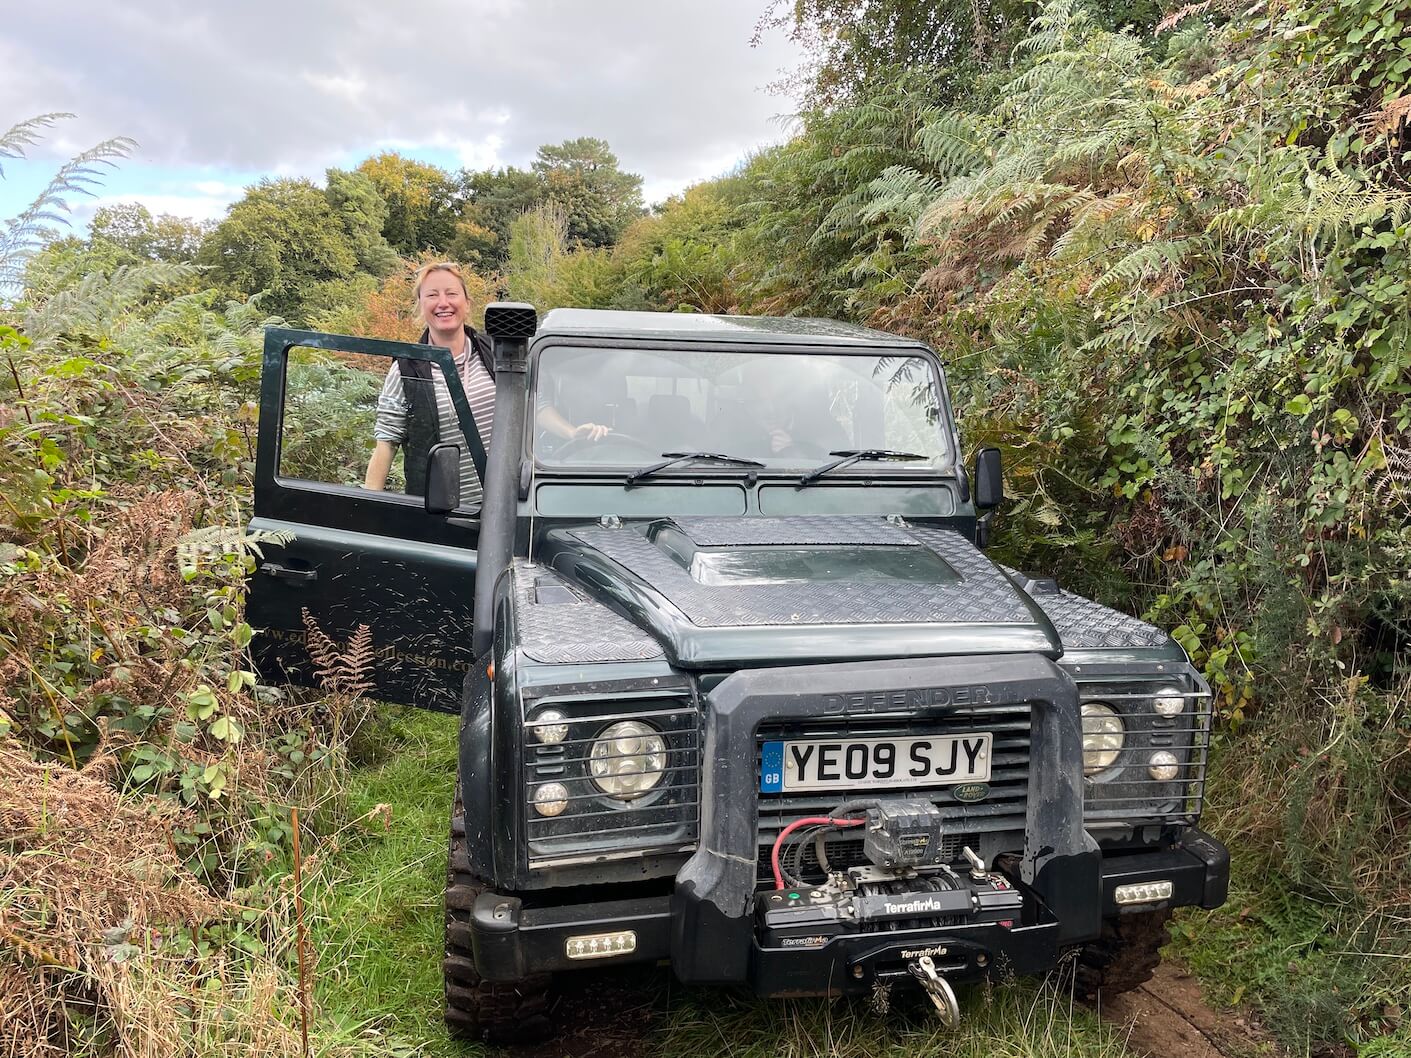 4x4 Landrover driving experience at Bovey Castle